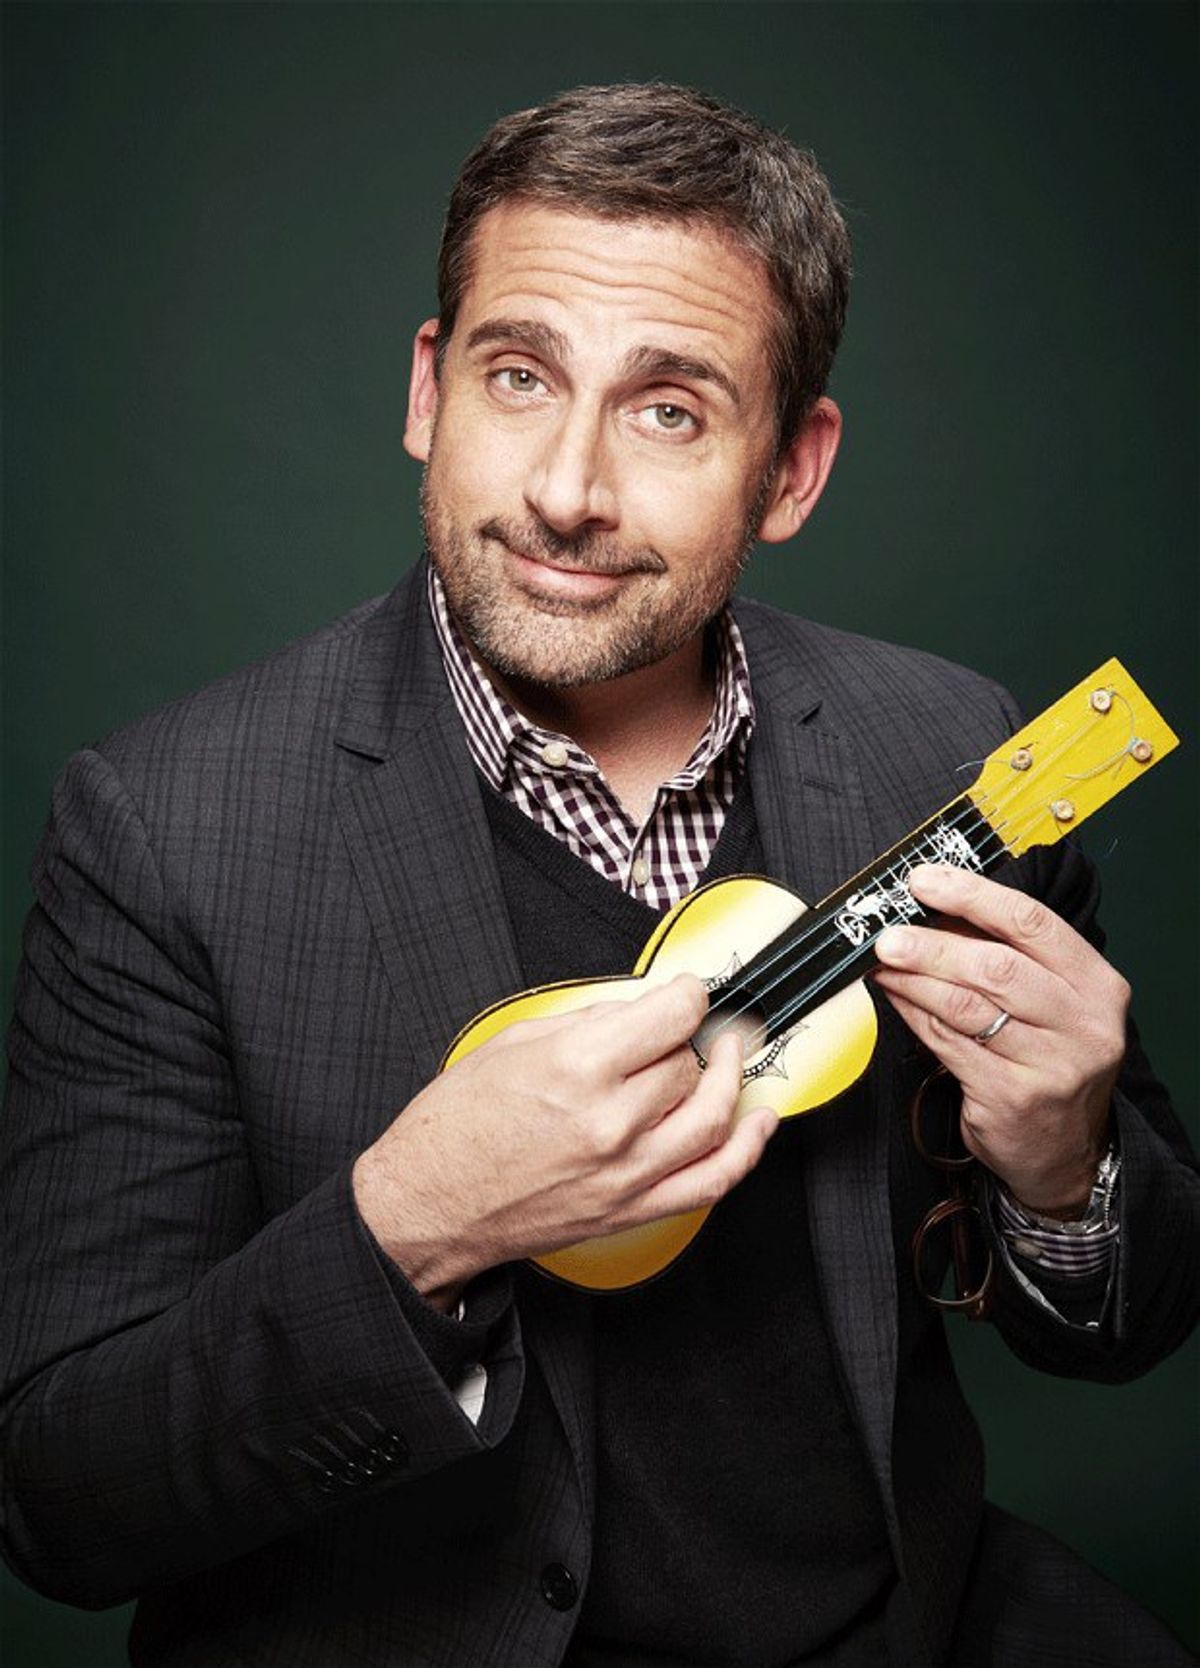 10 Reasons To Love Steve Carell